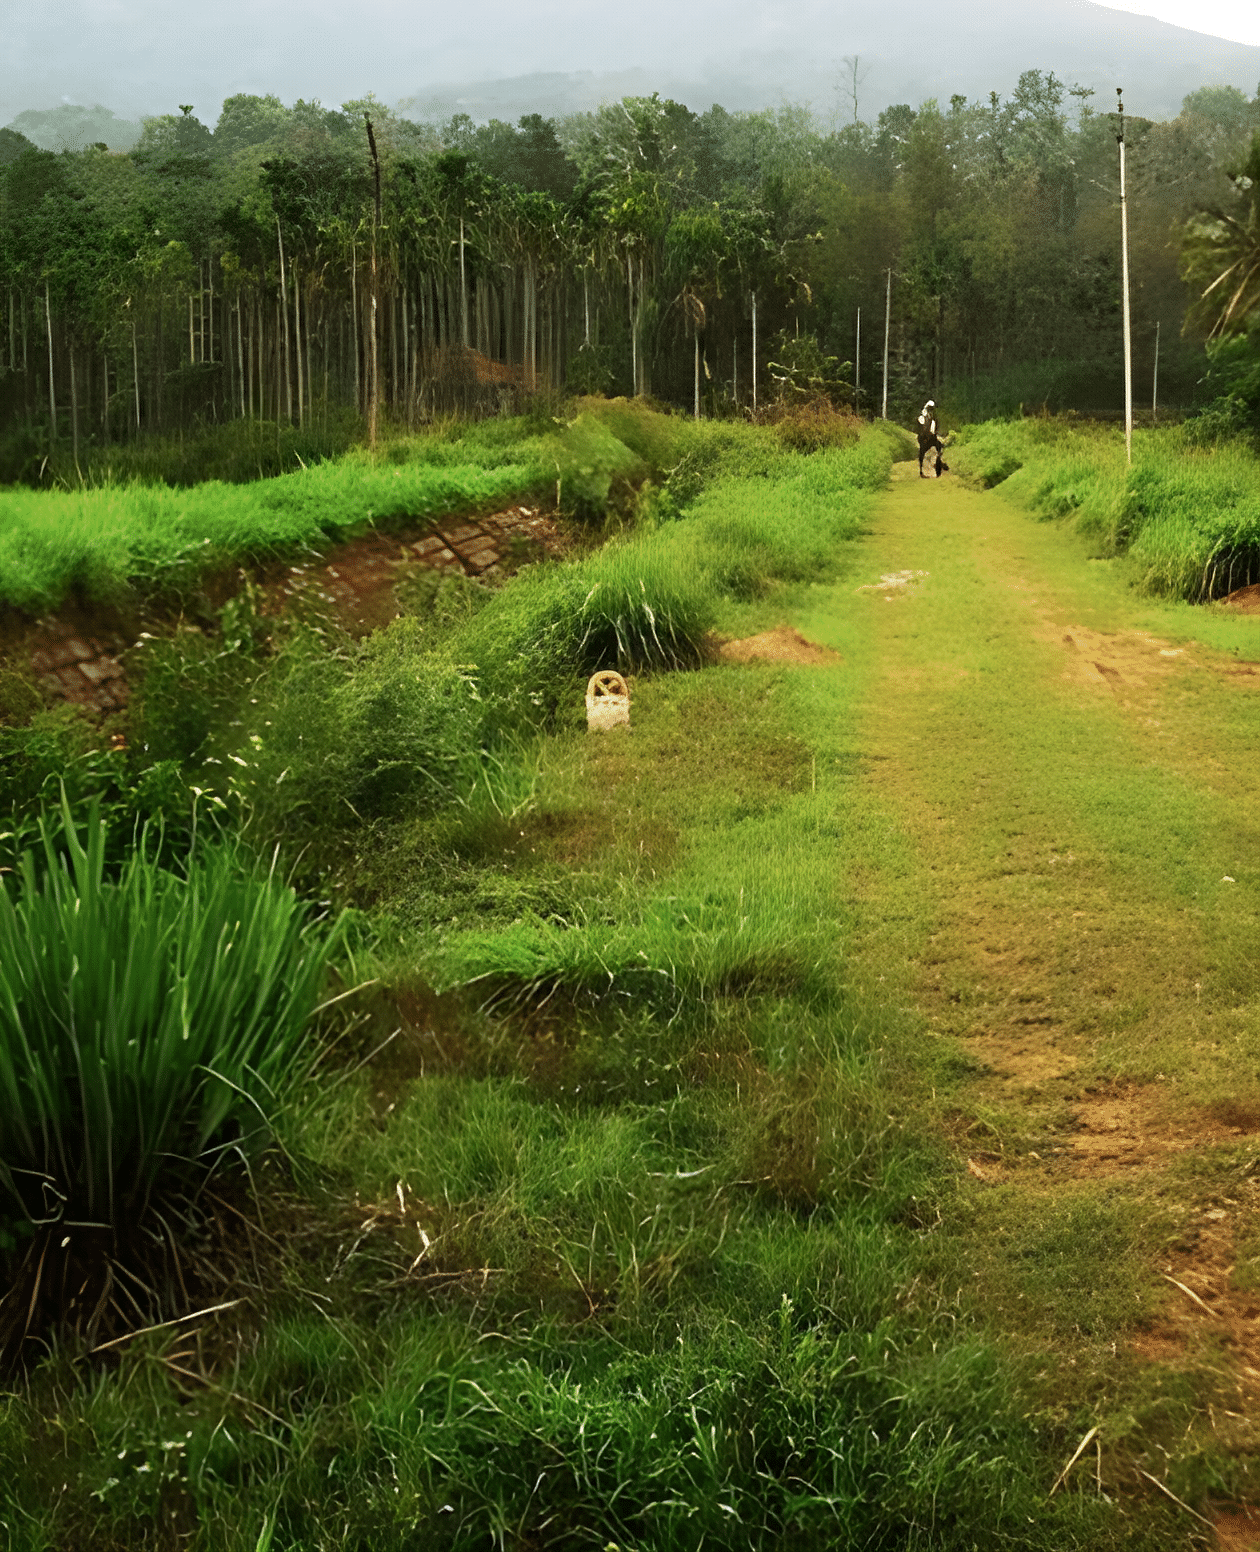 Cycle through the Plains, Fields, Lakes in Wayanad